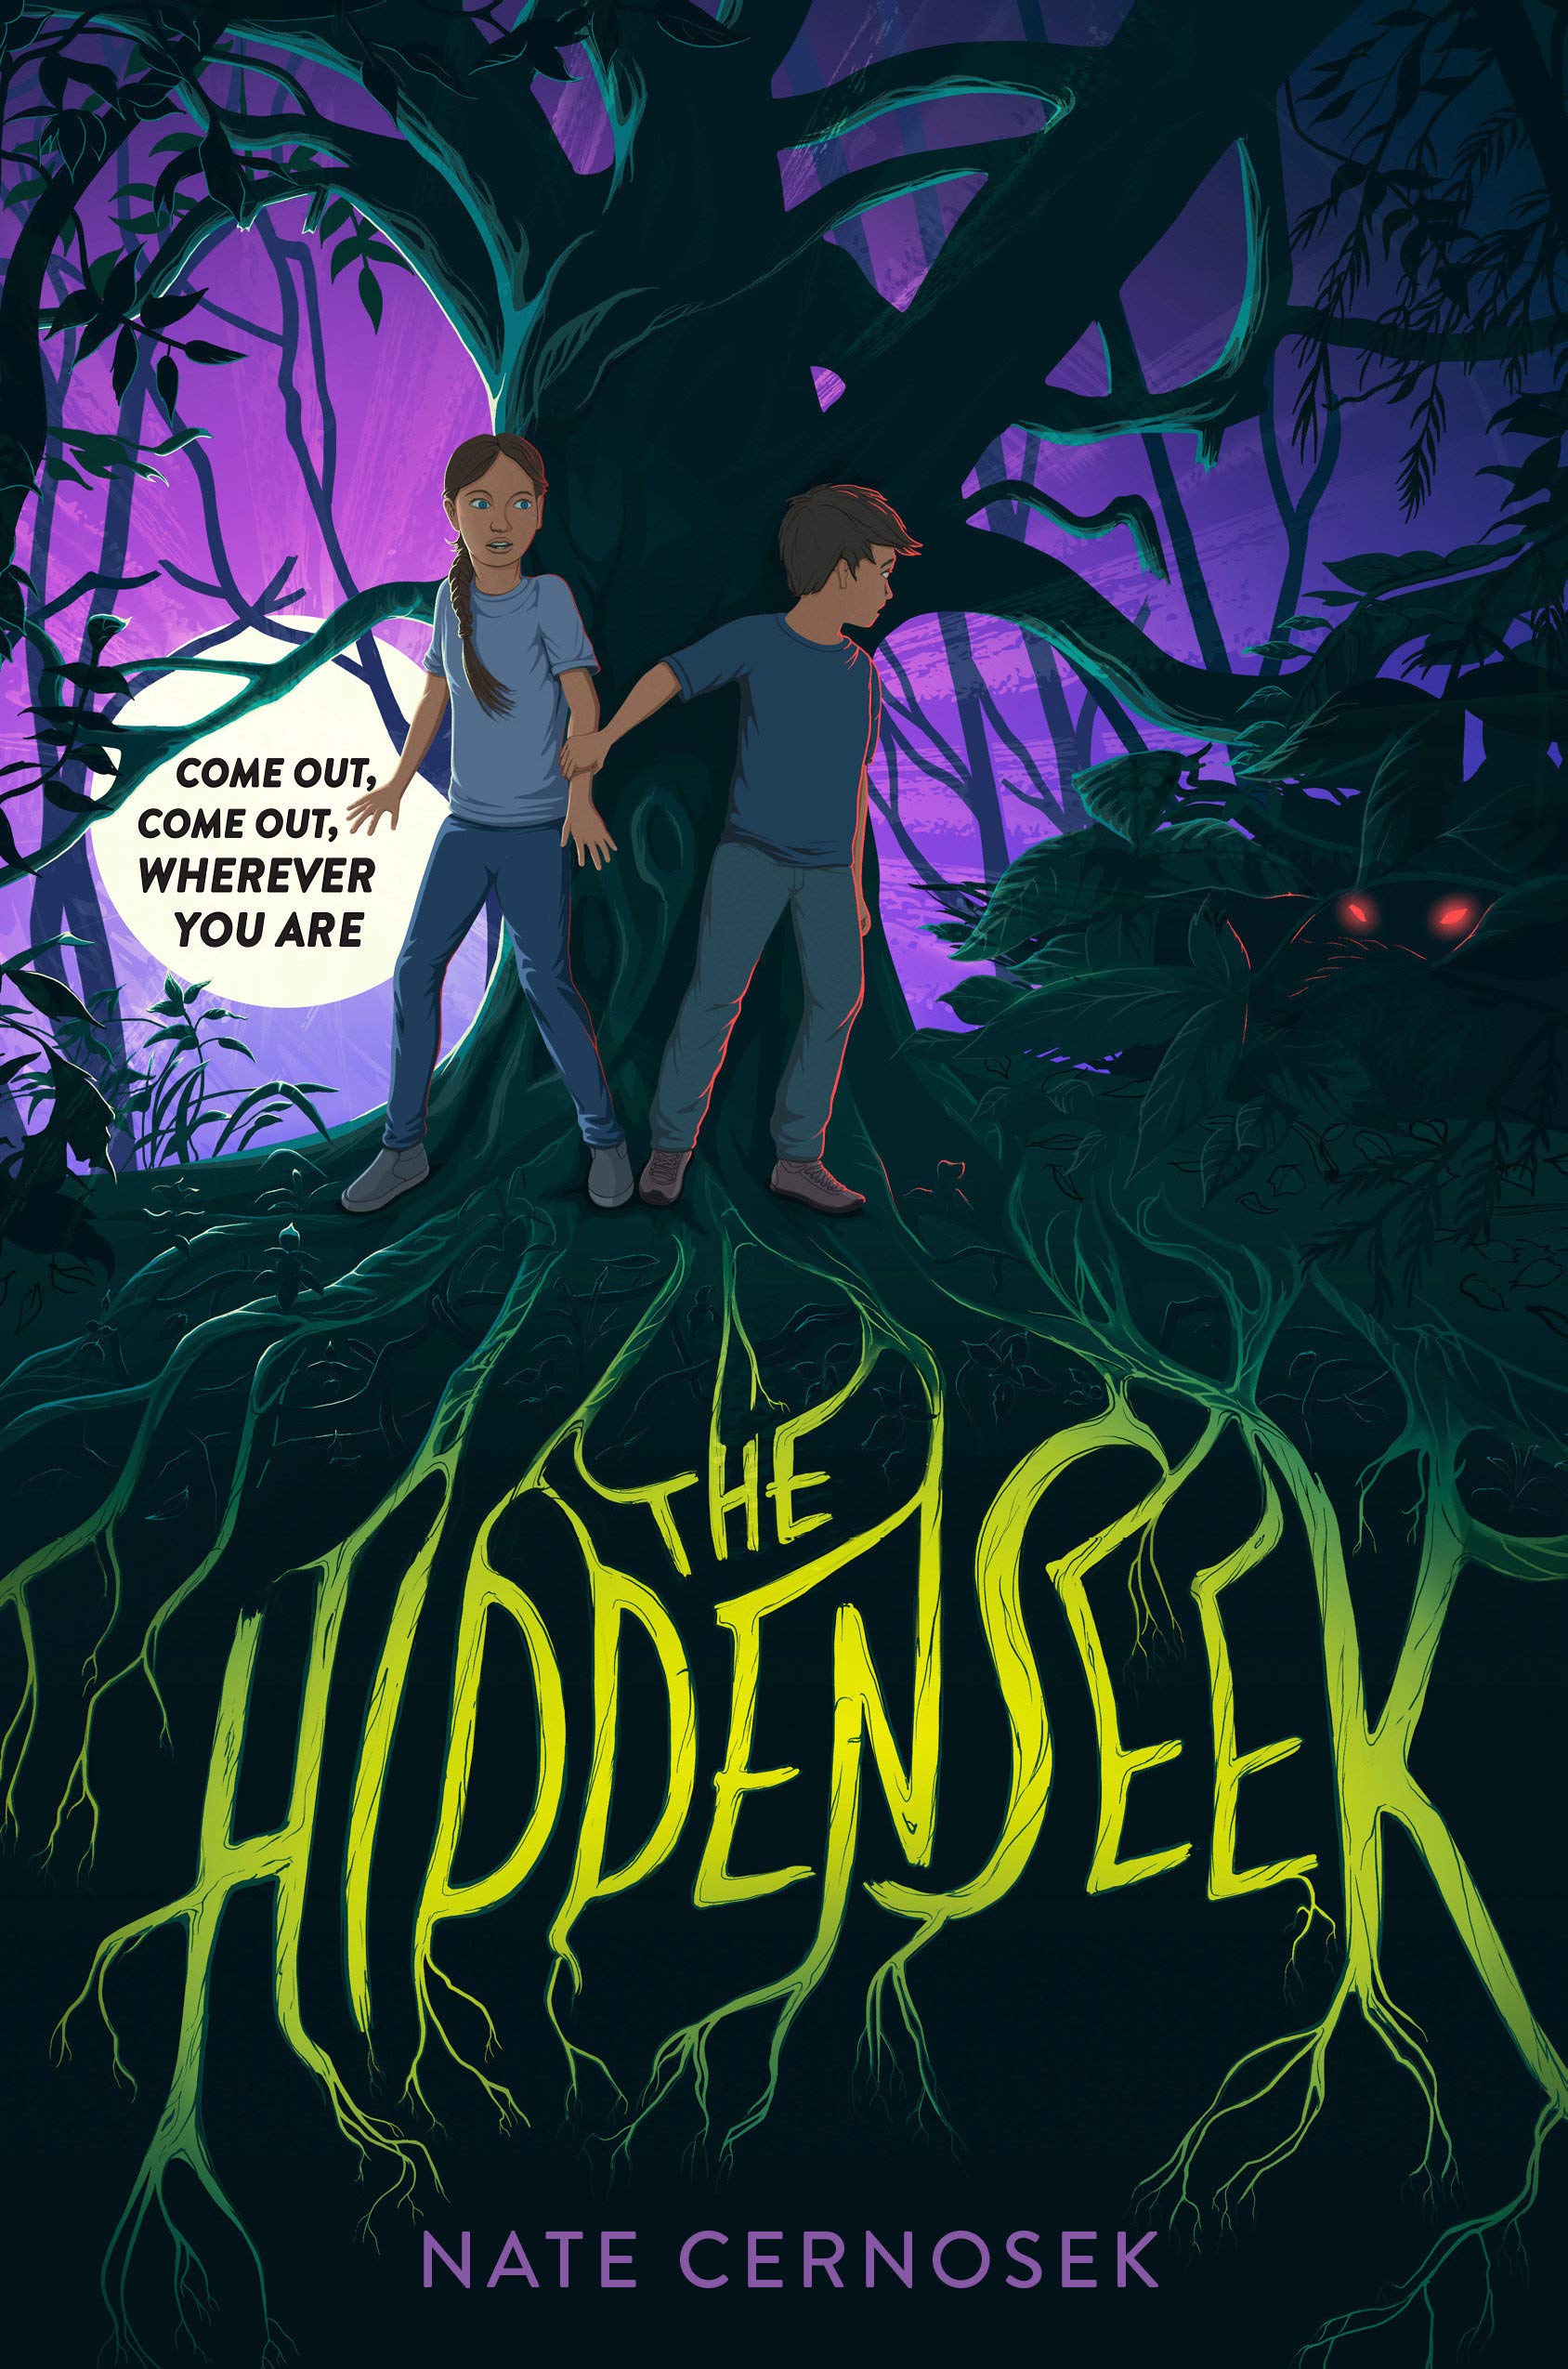 The cover of the book "Hiddenseek" by Nate Cernosek, showing two children hiding behind a tree with a purple sky behind them, and the words "Come out, Come out, wherever you are" beside them.